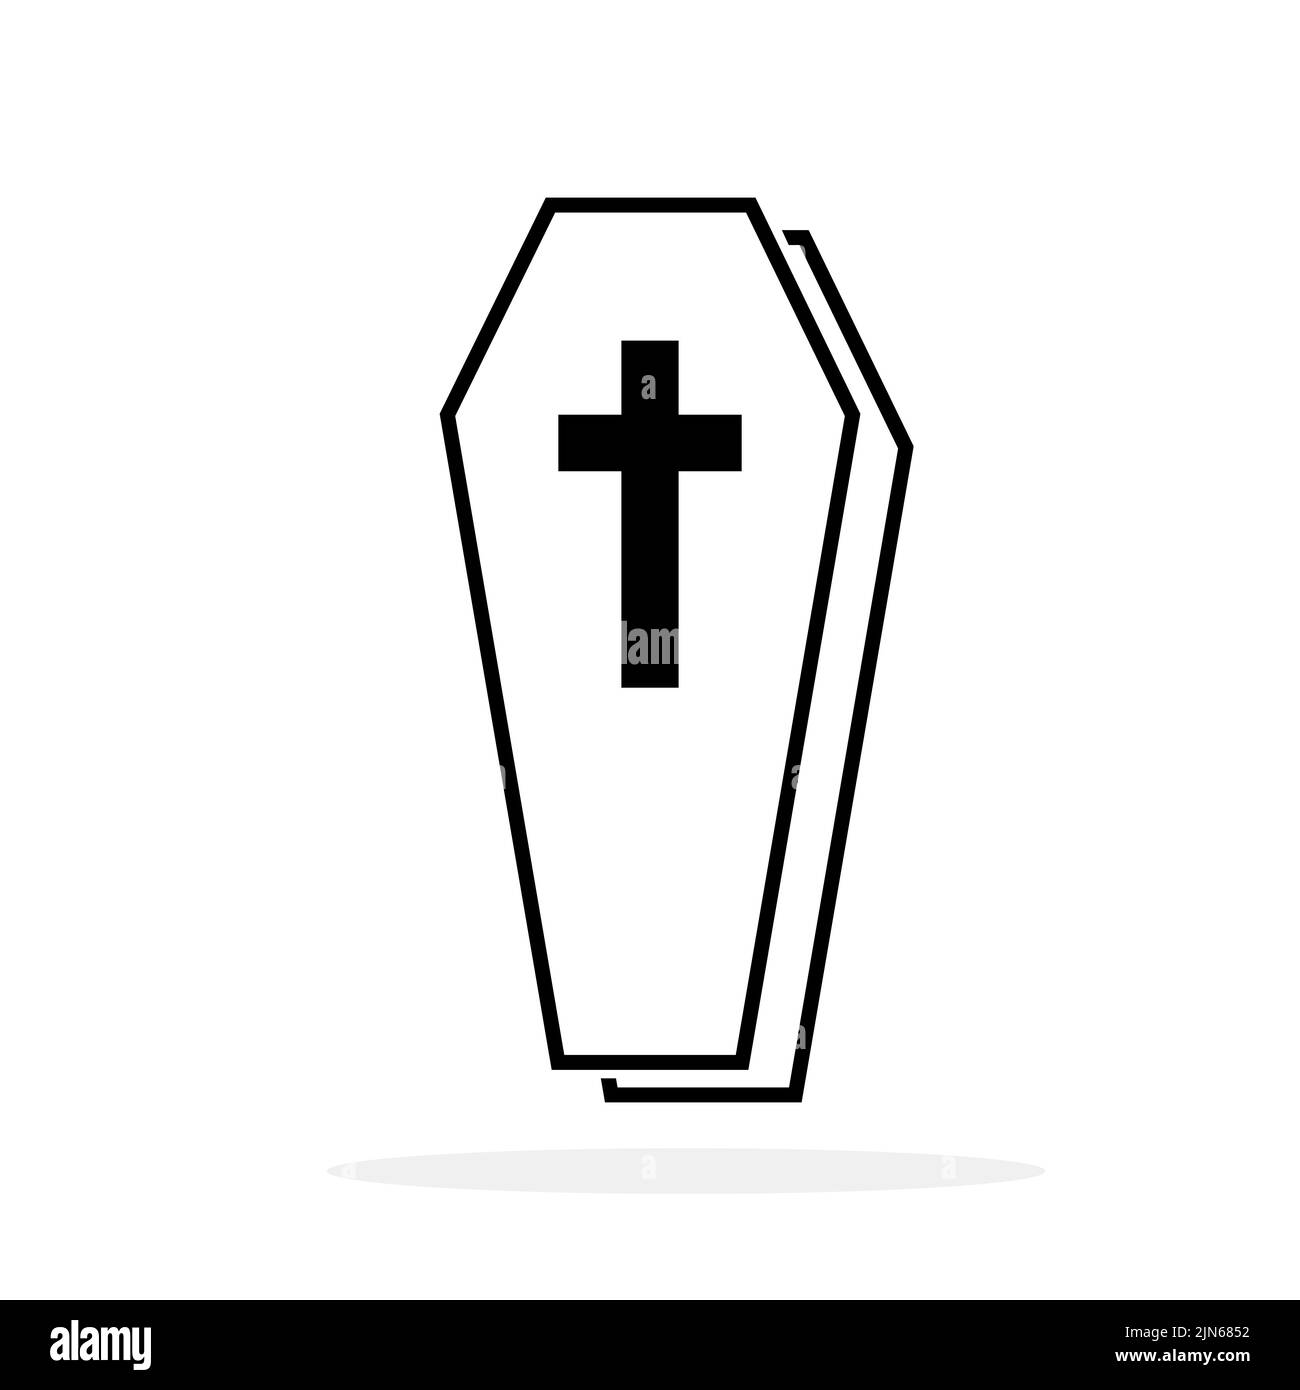 Coffin icon. Wooden coffin black icon with cross. Coffin isolated symbol. Vector illustration. Stock Vector